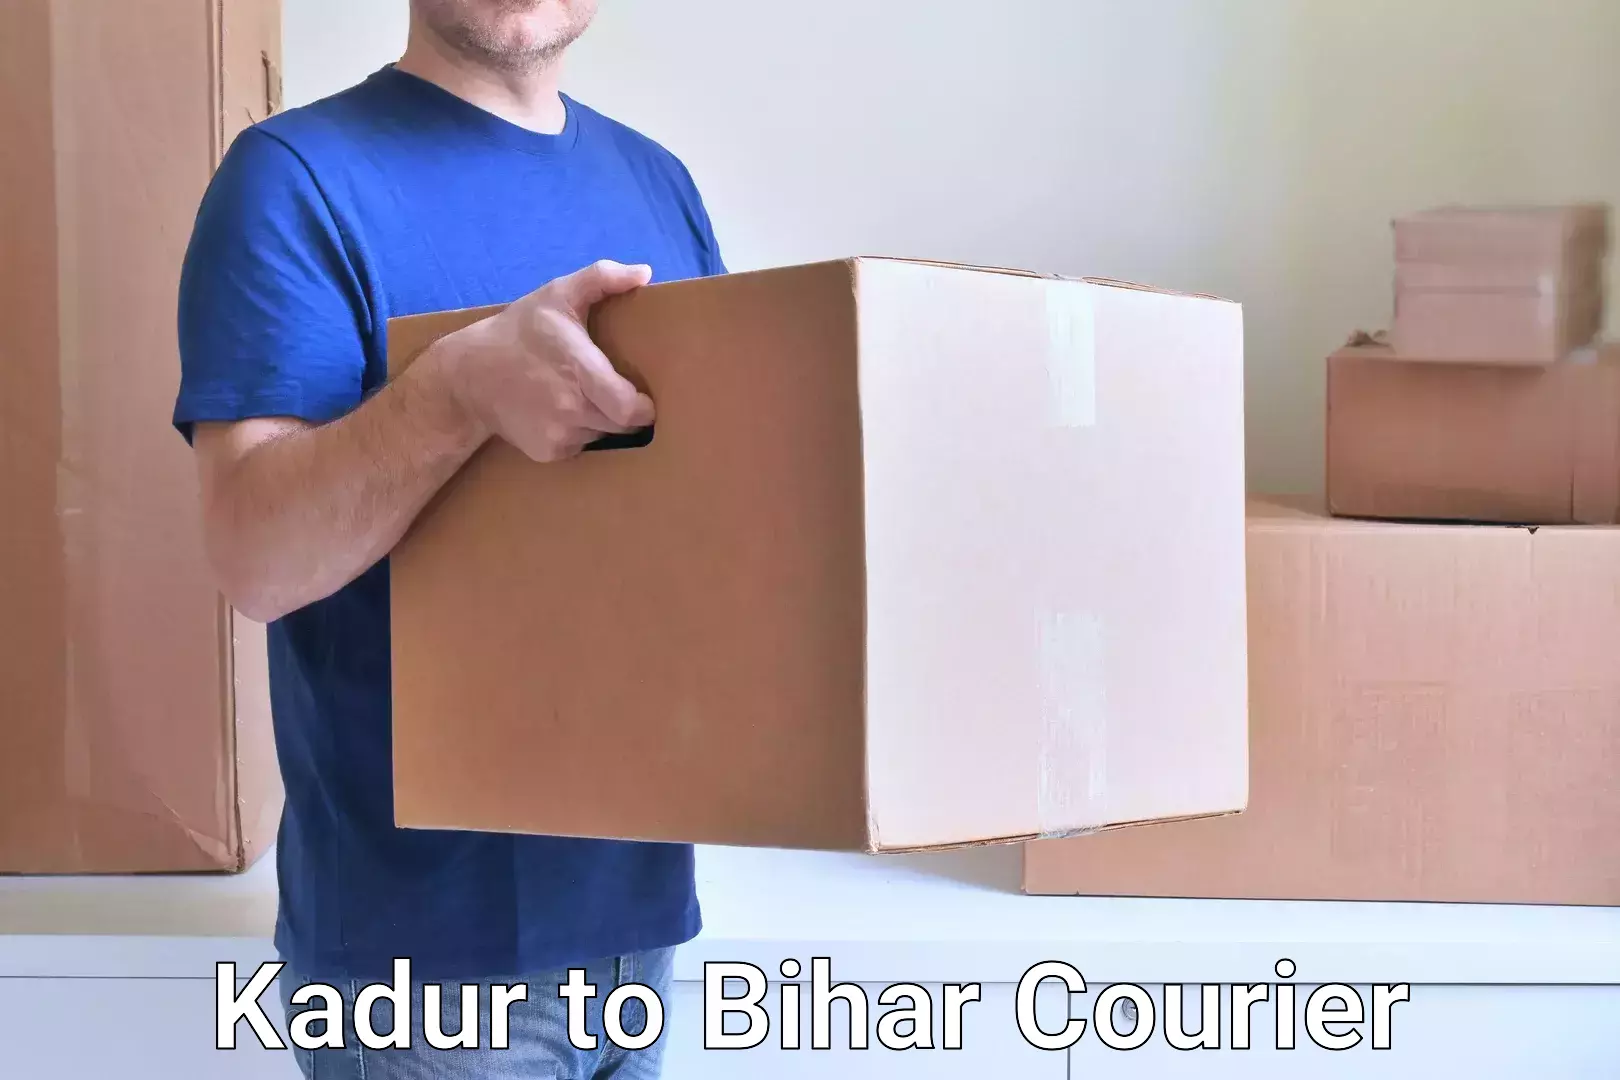 Courier rate comparison in Kadur to Fatwah